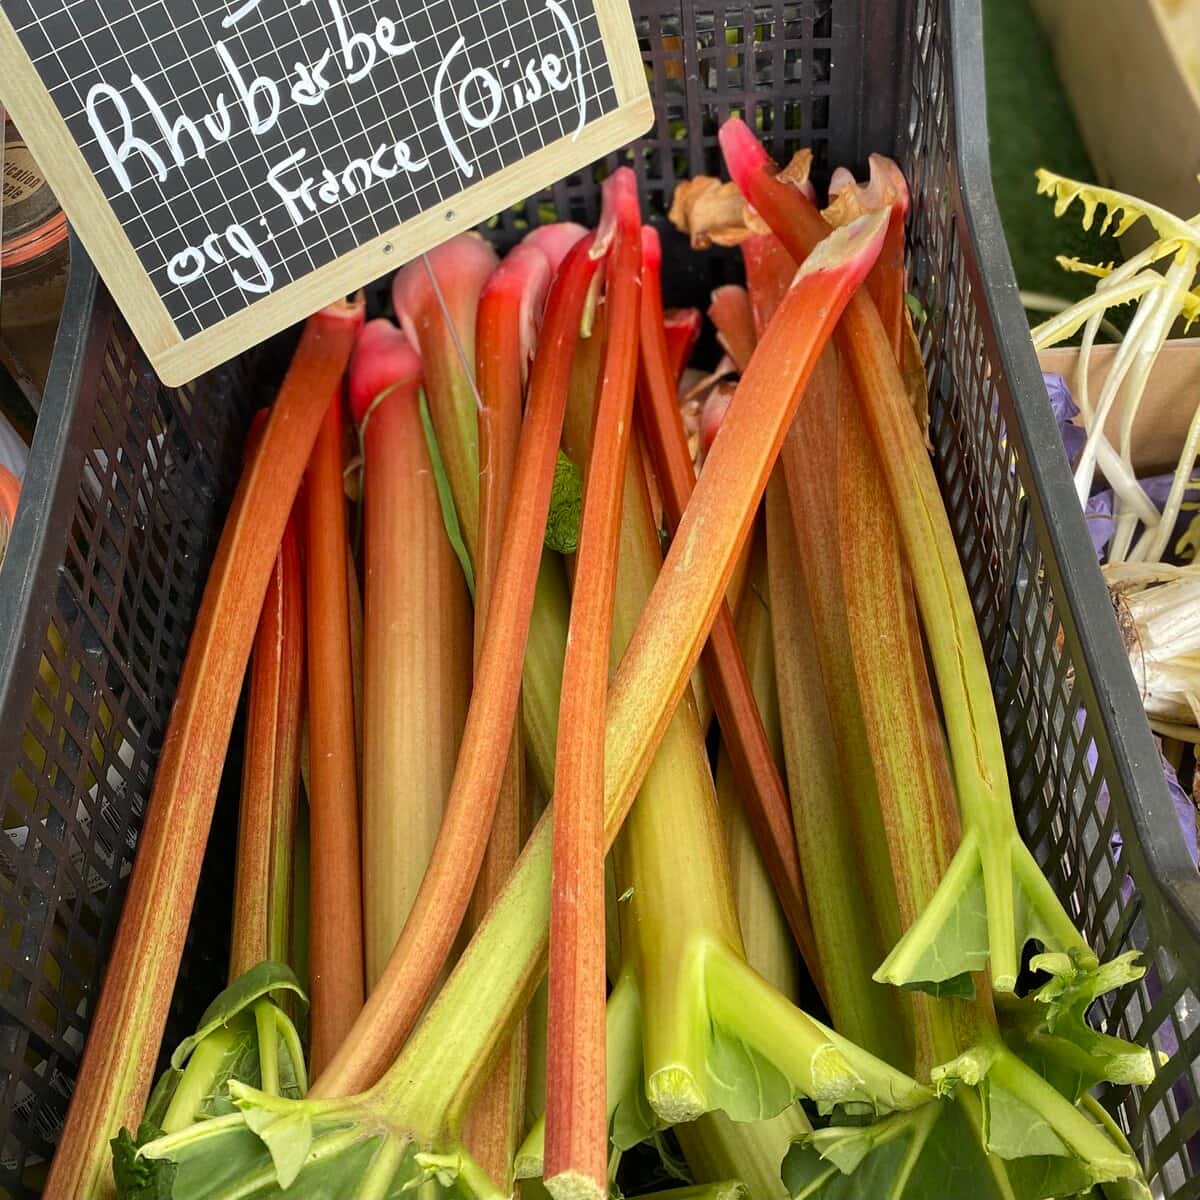 stalks of rhubarb in a crate at the market